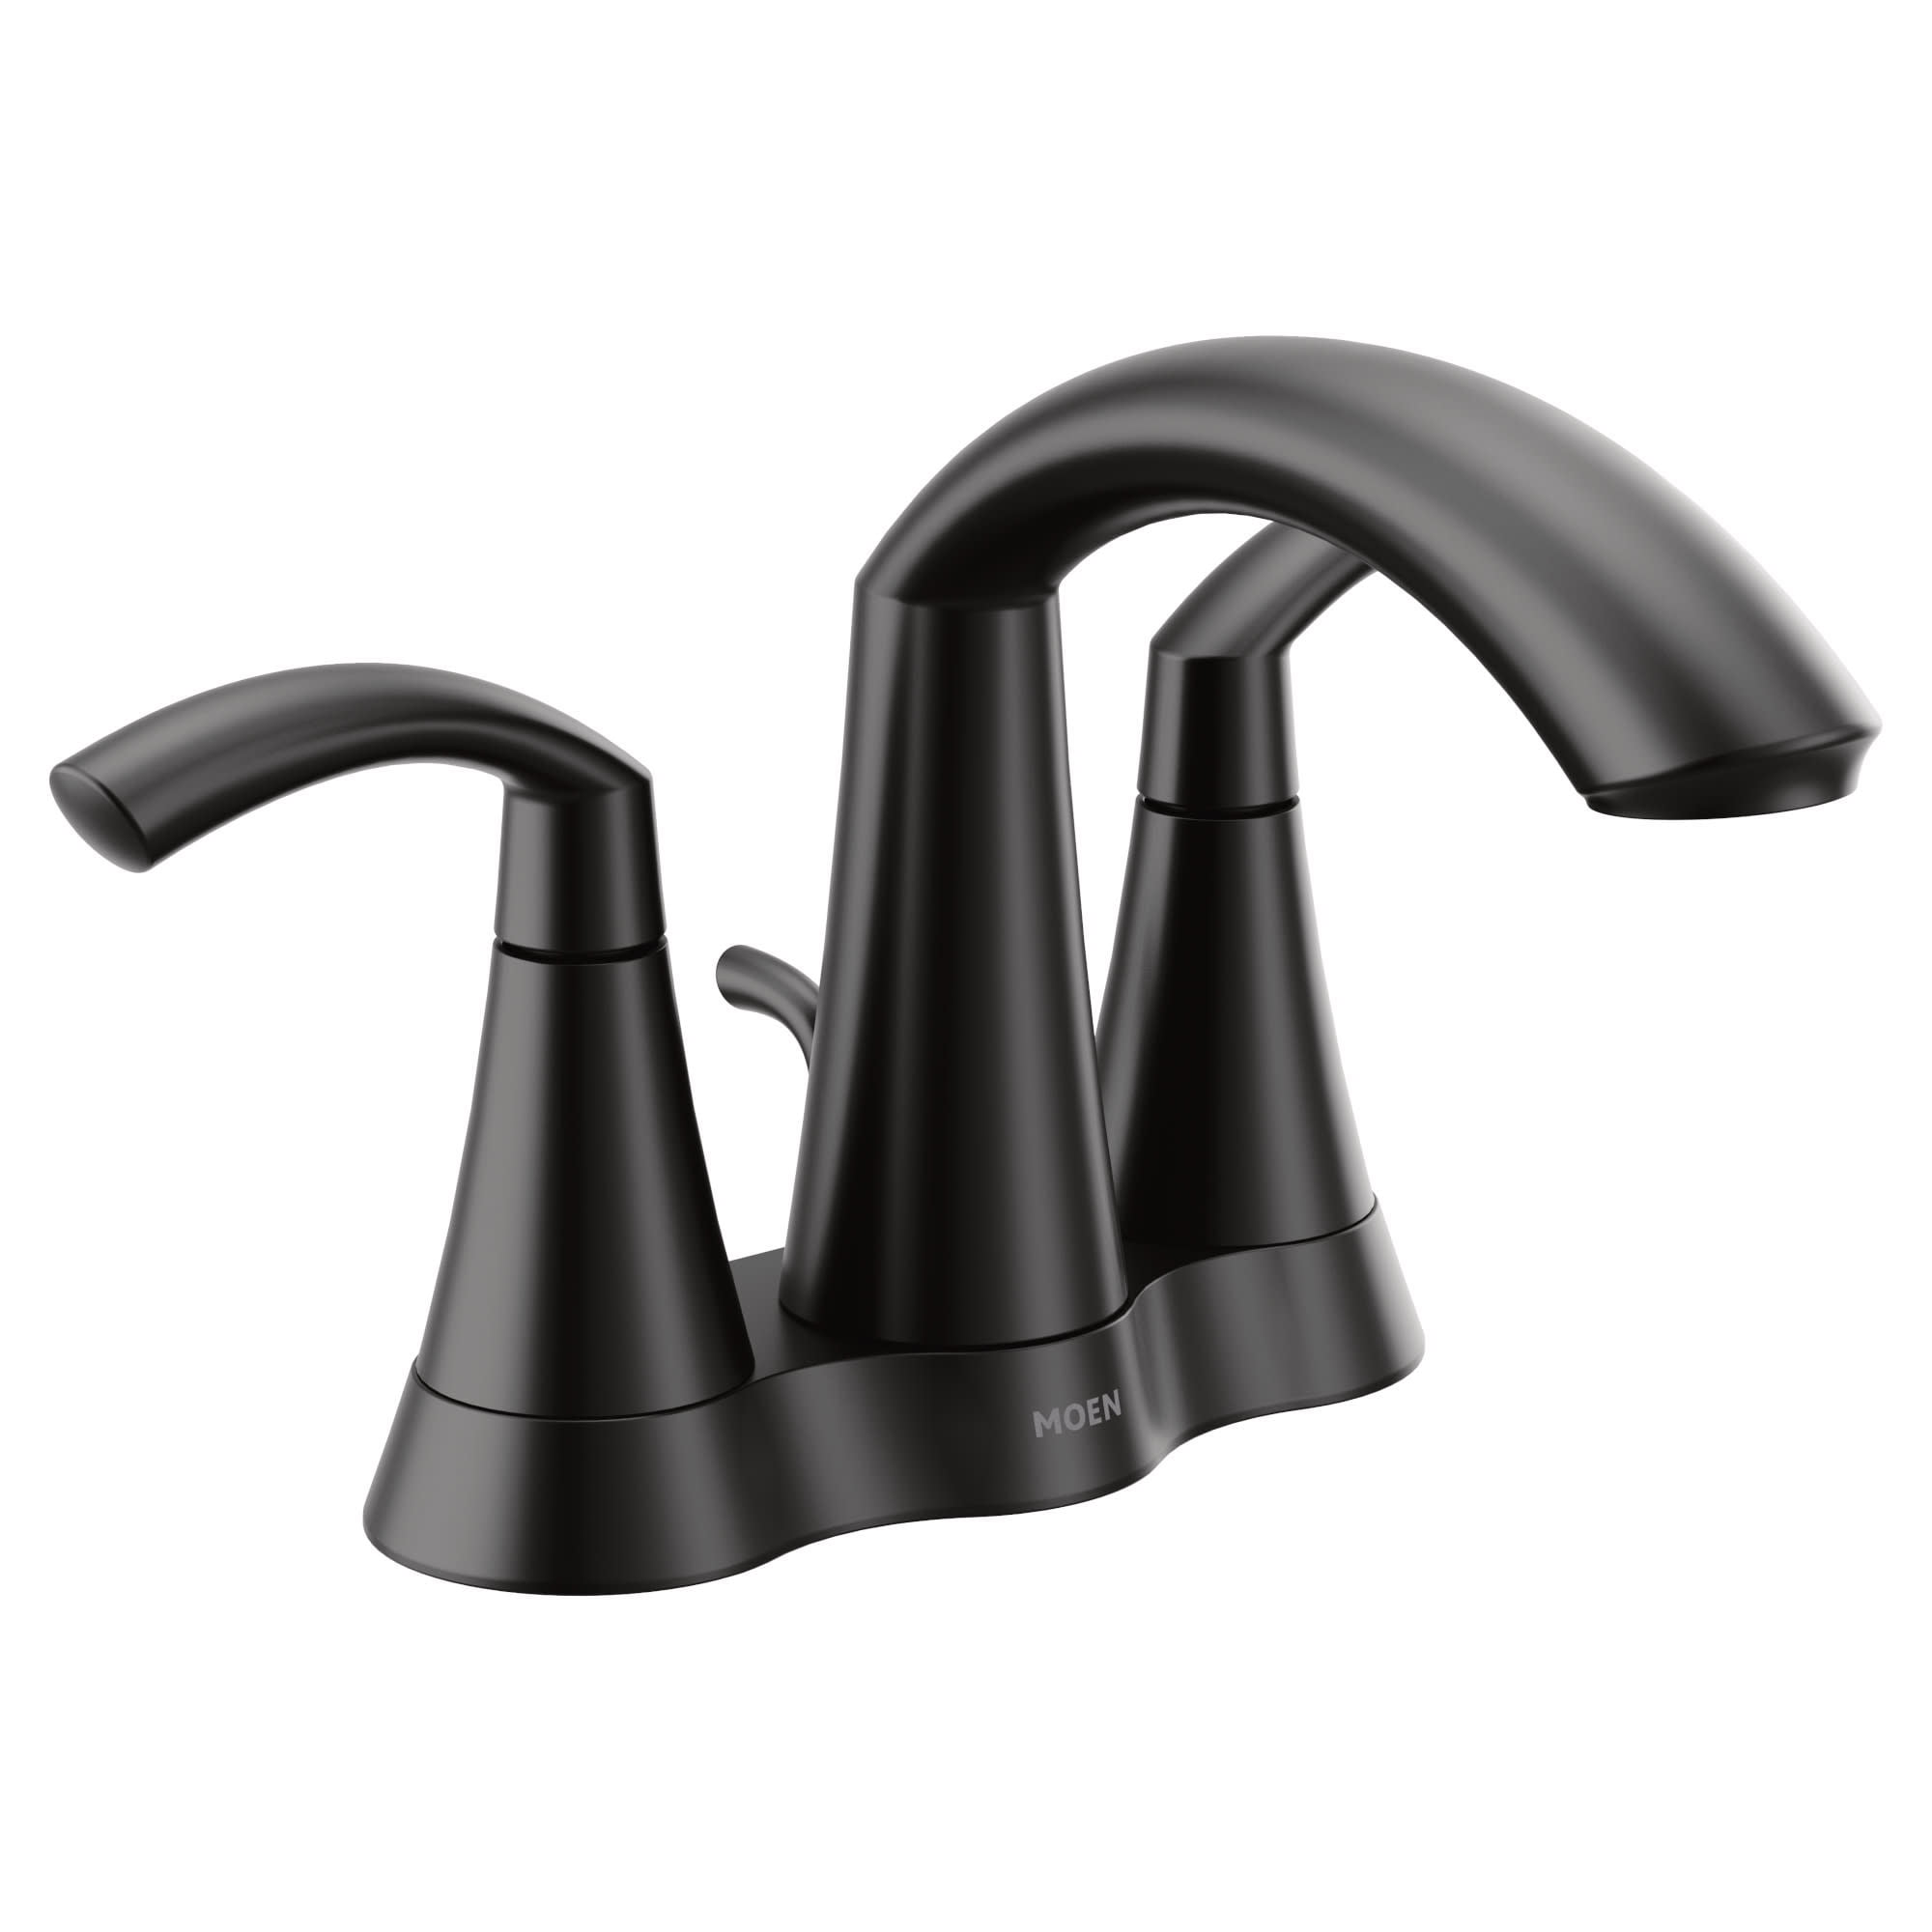 Details about   Wall Mounted Mixer Water Taps Contemporary Style Brushed Nickel Bathroom Faucets 